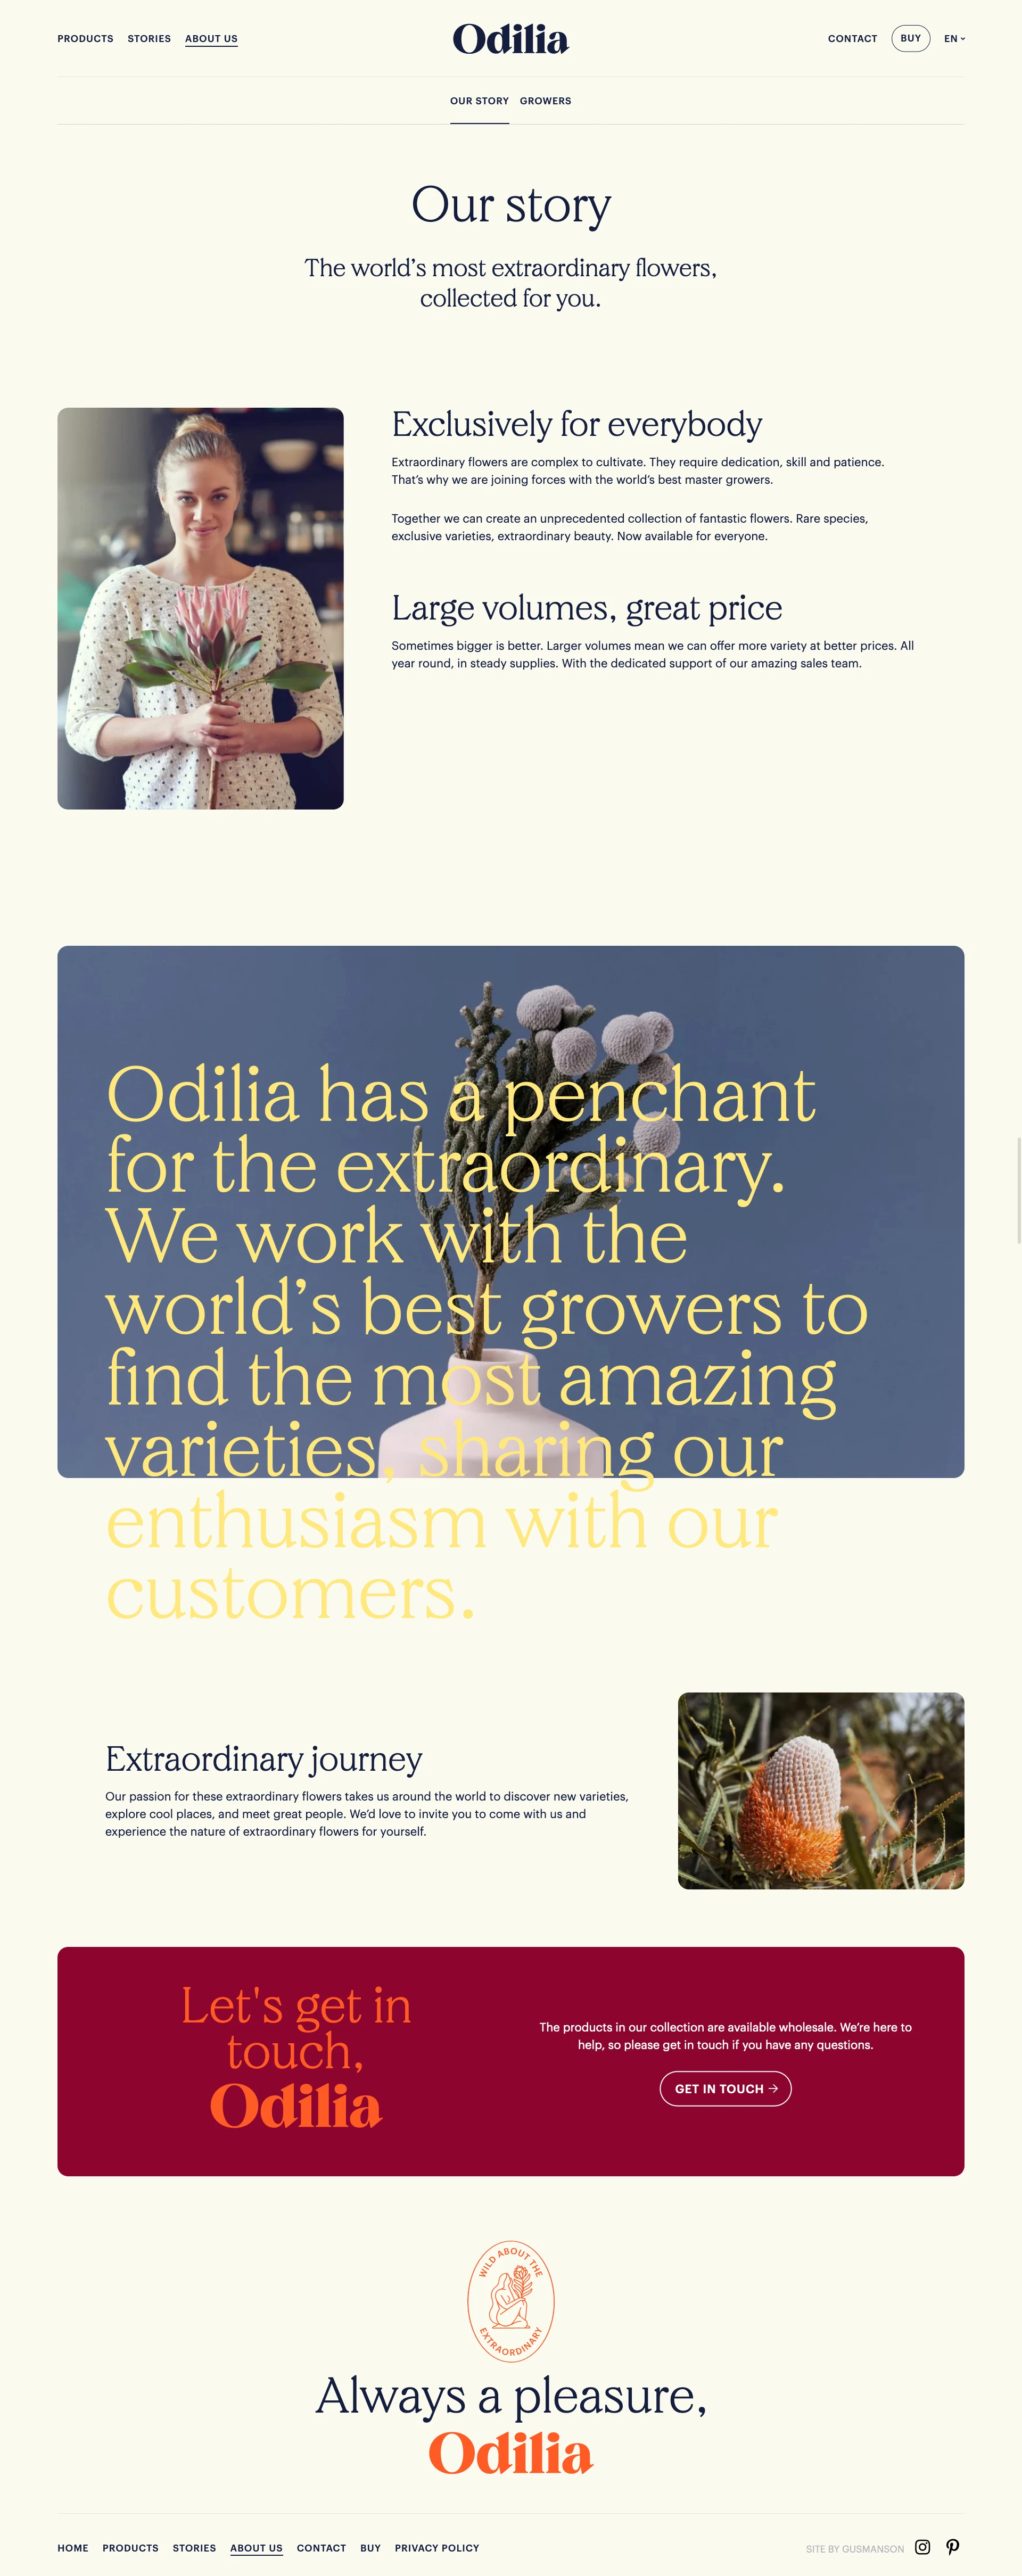 Odilia Flowers Landing Page Example: Odilia collects the world’s most extraordinary flowers. With a keen eye she selects the best varieties from fields of master growers in South Africa, Portugal and beyond.